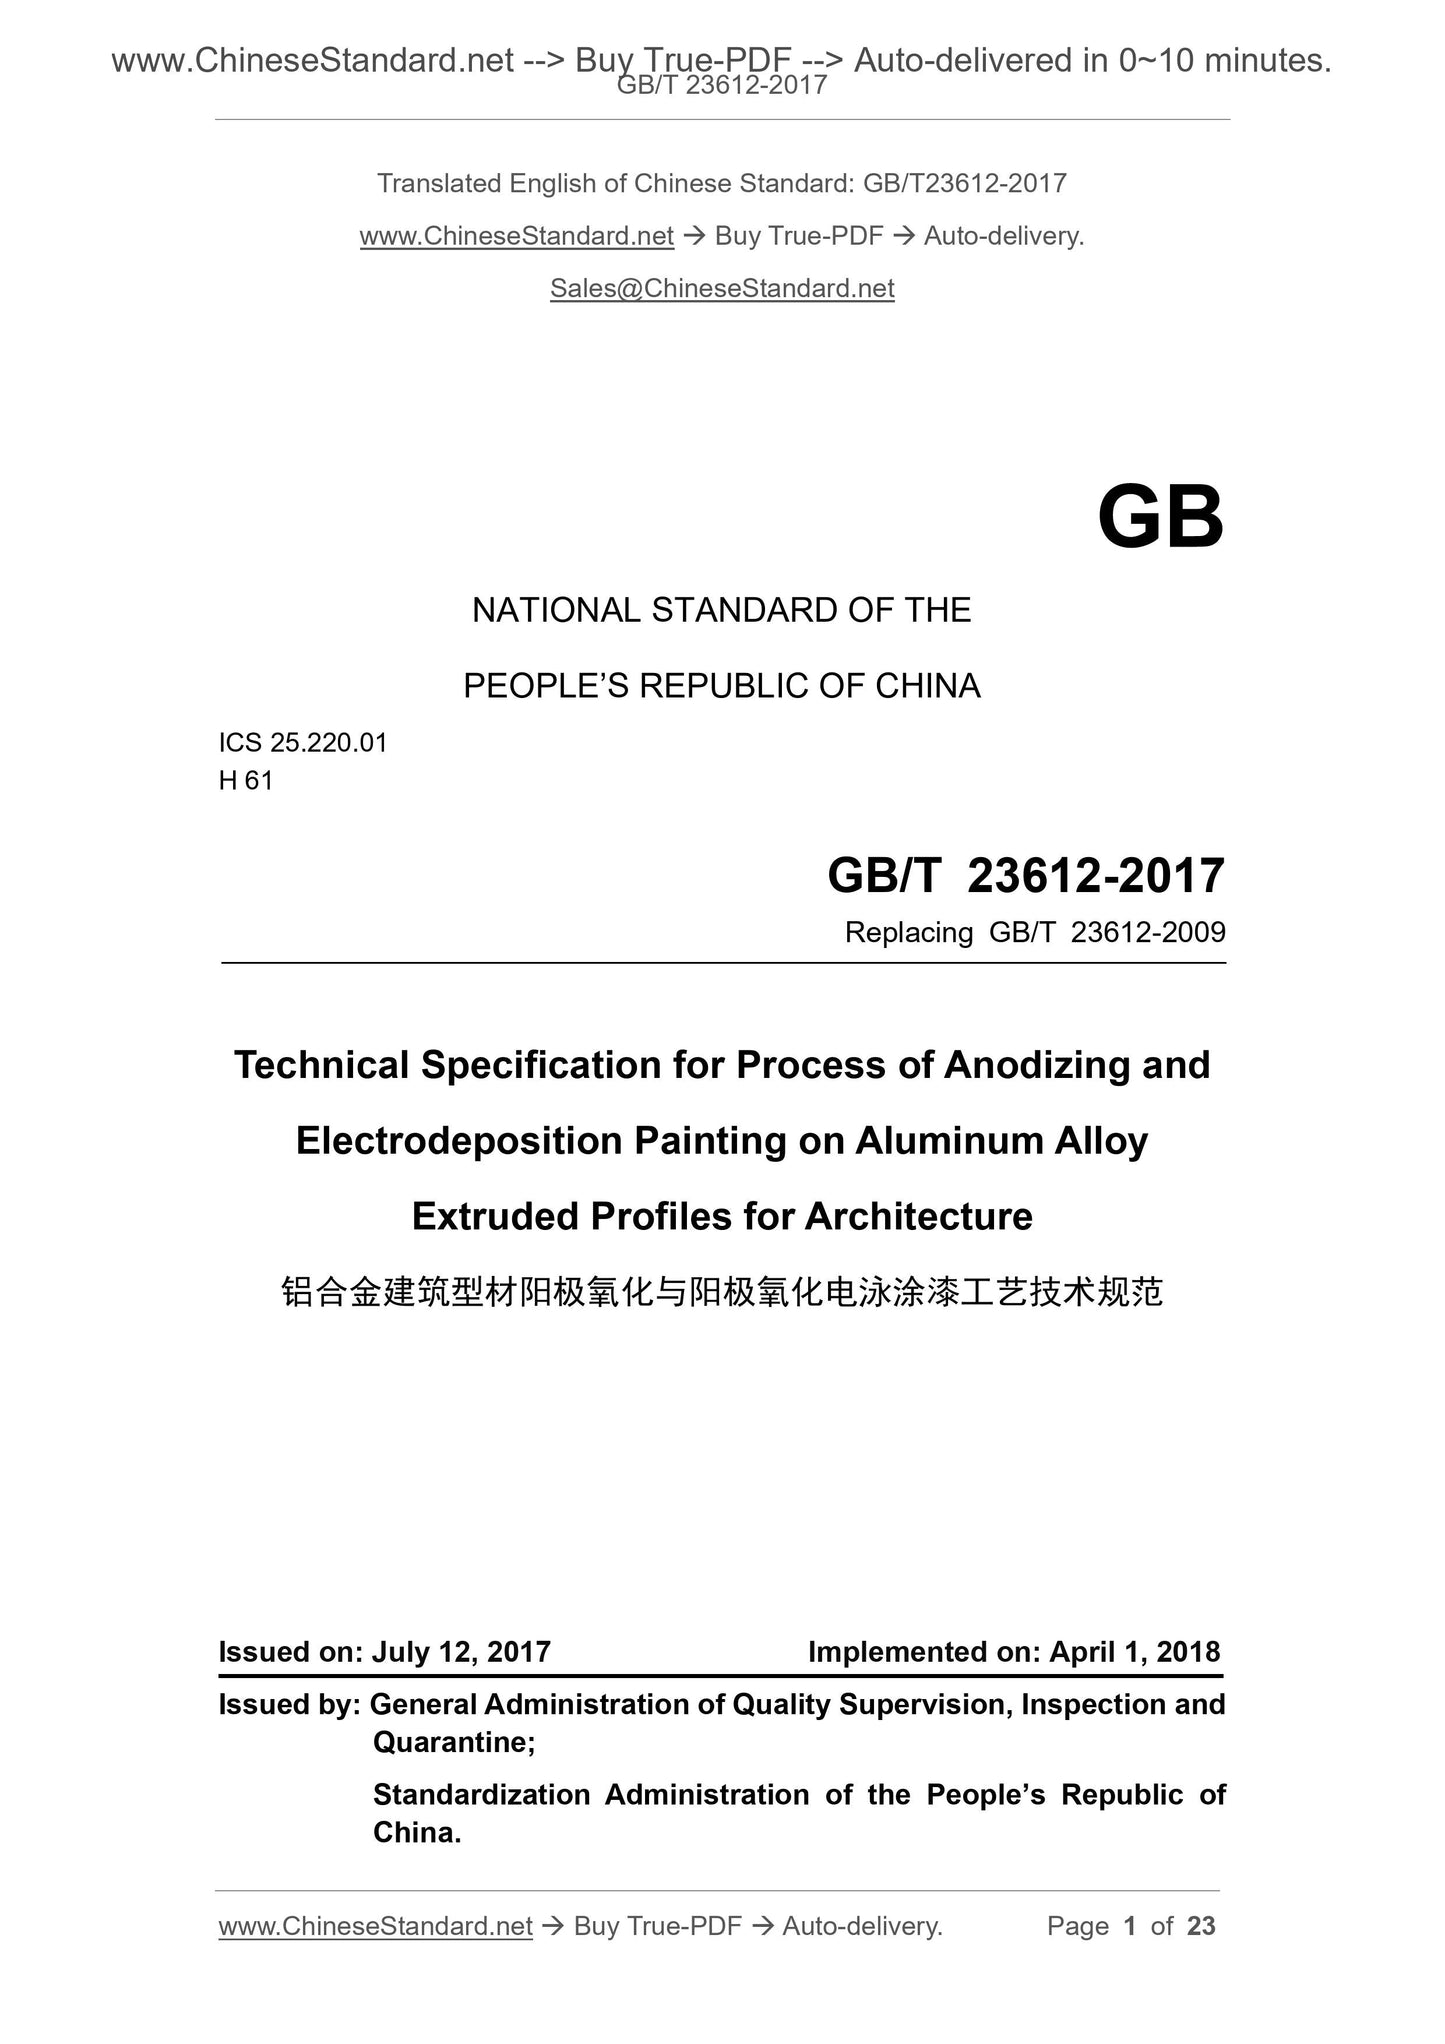 GB/T 23612-2017 Page 1